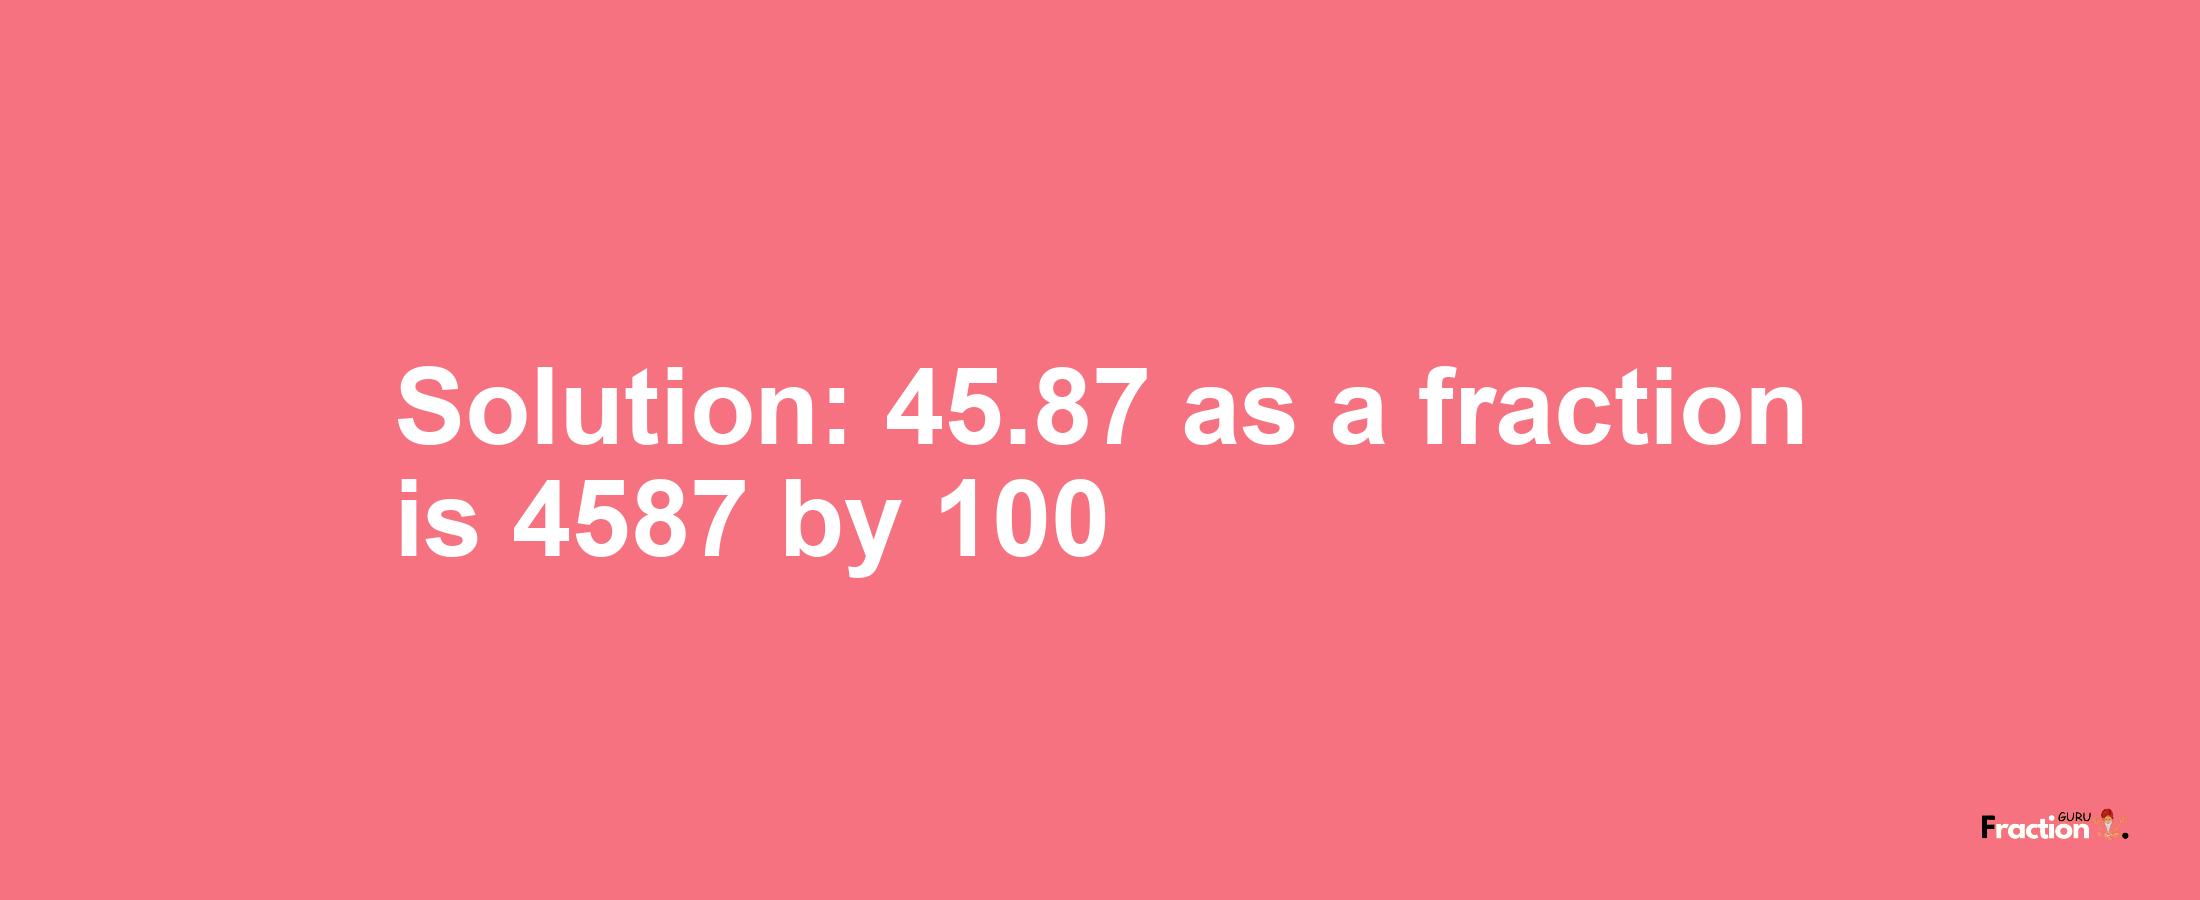 Solution:45.87 as a fraction is 4587/100